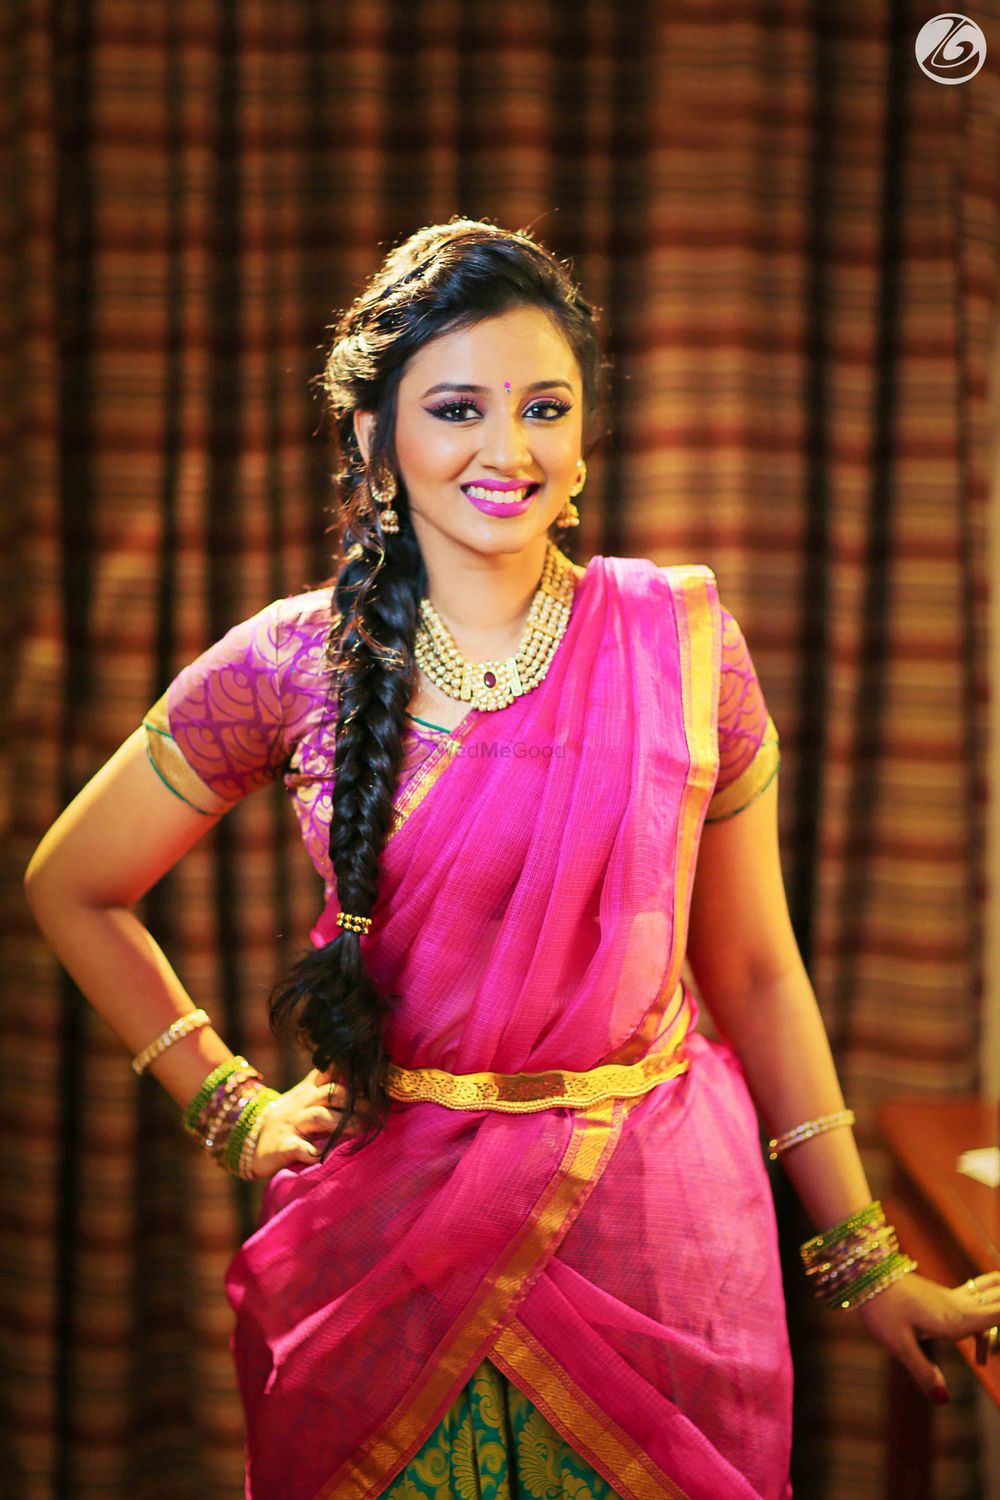 Photo of South Indian Bride with Fish Tail Braid